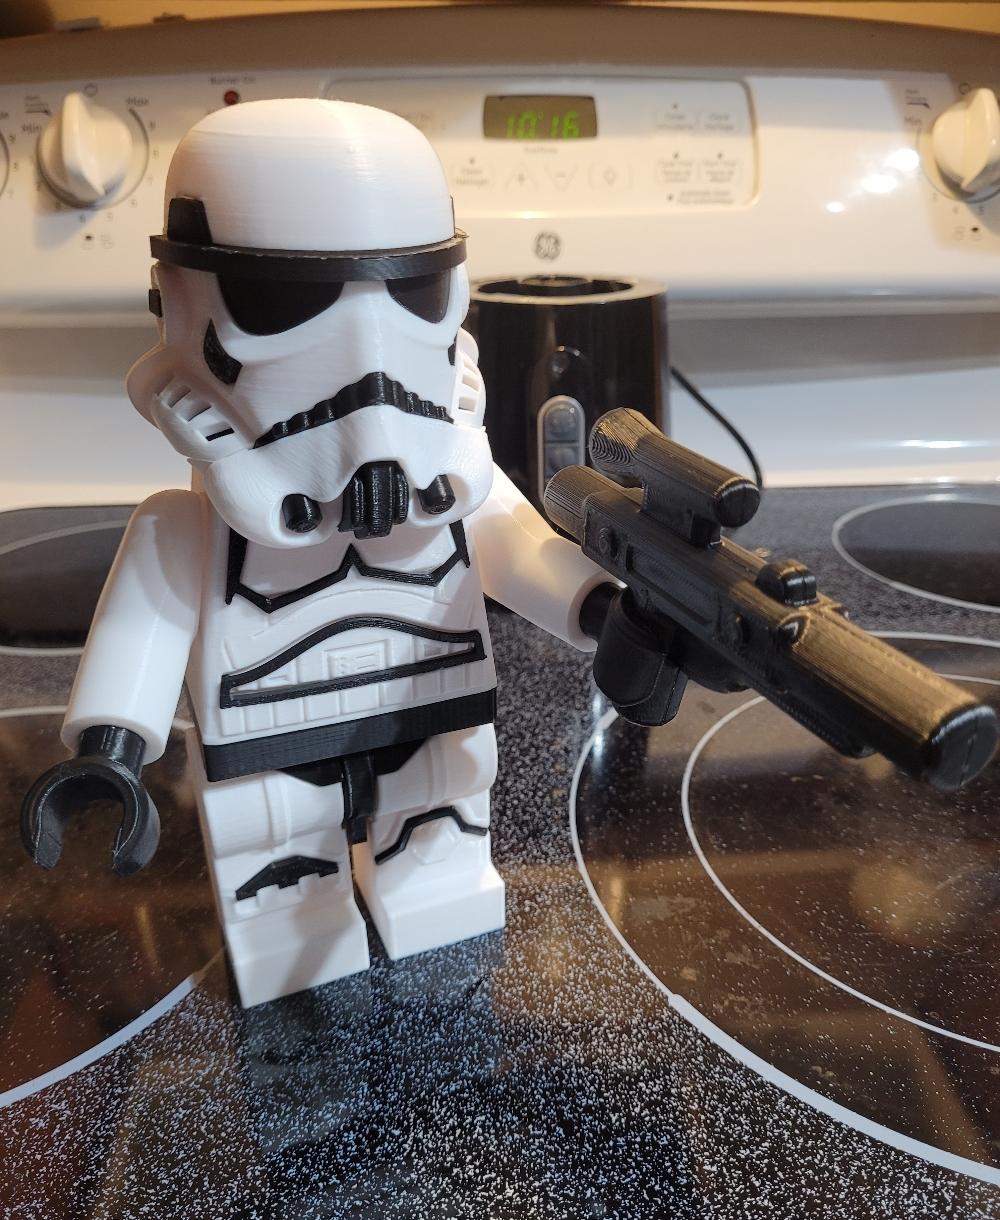 Stormtrooper (6:1 LEGO-inspired brick figure, NO MMU/AMS, NO supports, NO glue) - Really enjoyed building this! - 3d model